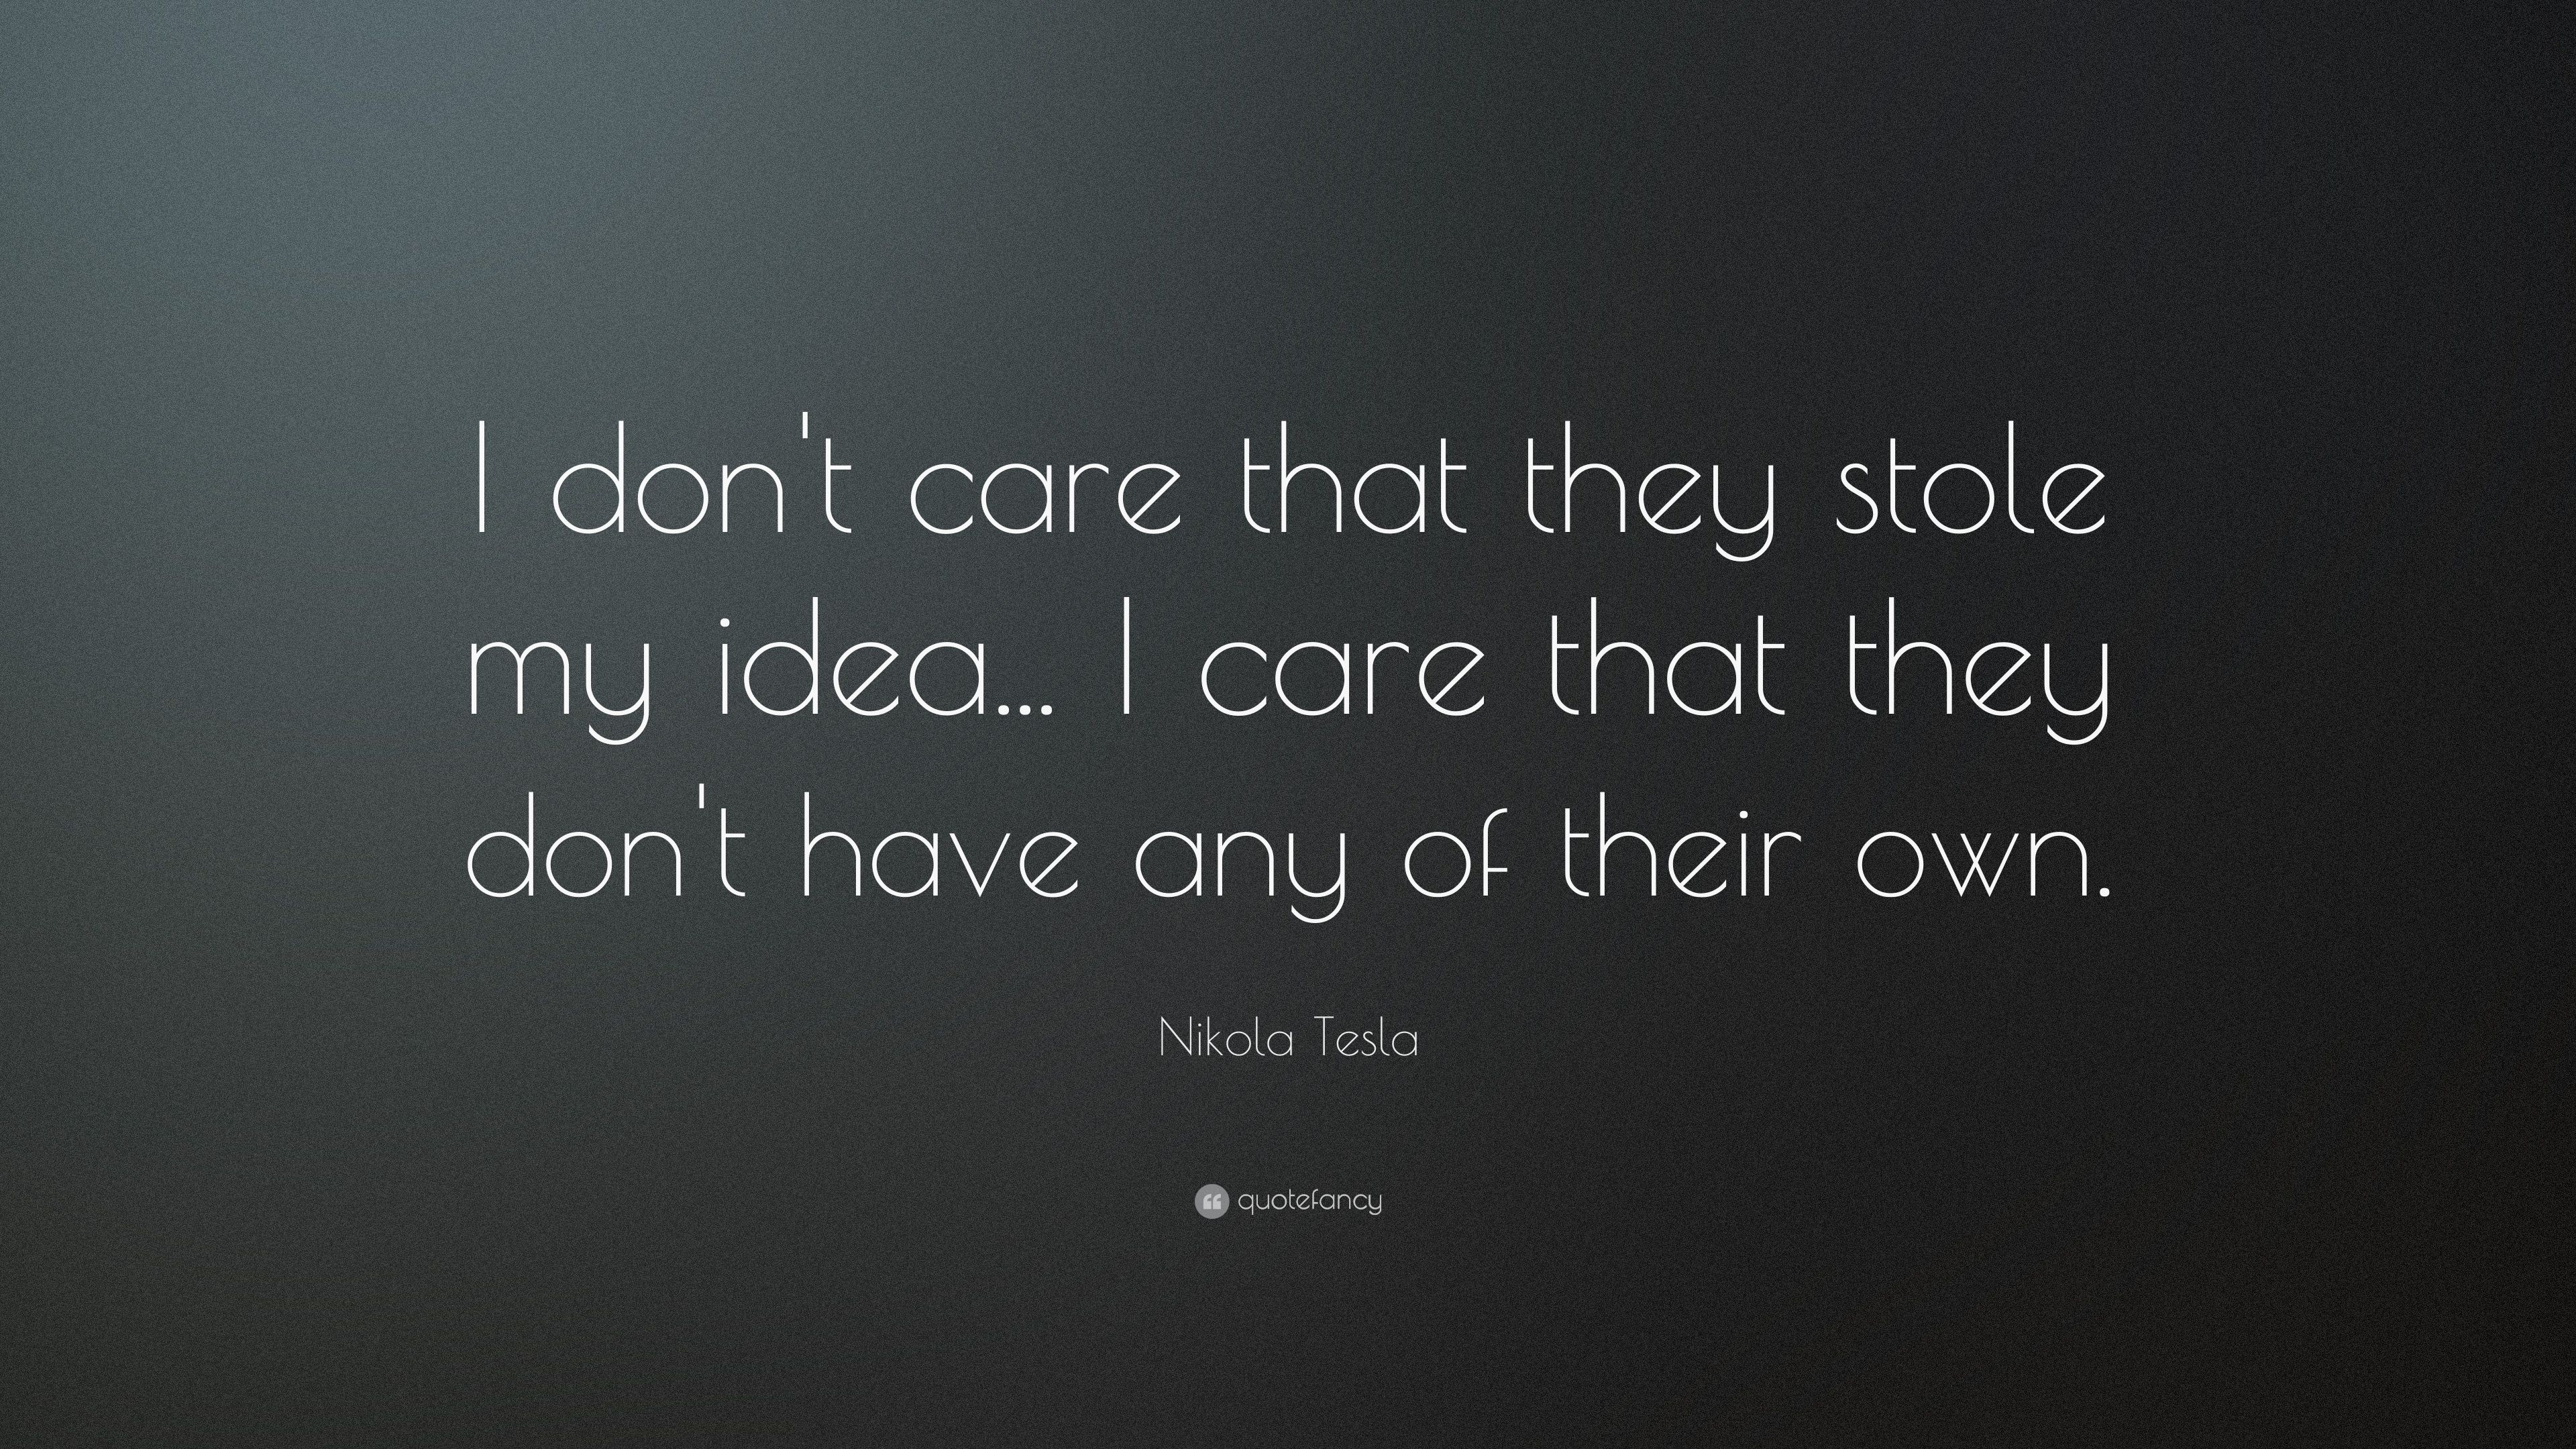 Nikola Tesla Quote: "I don't care that they stole my idea... 